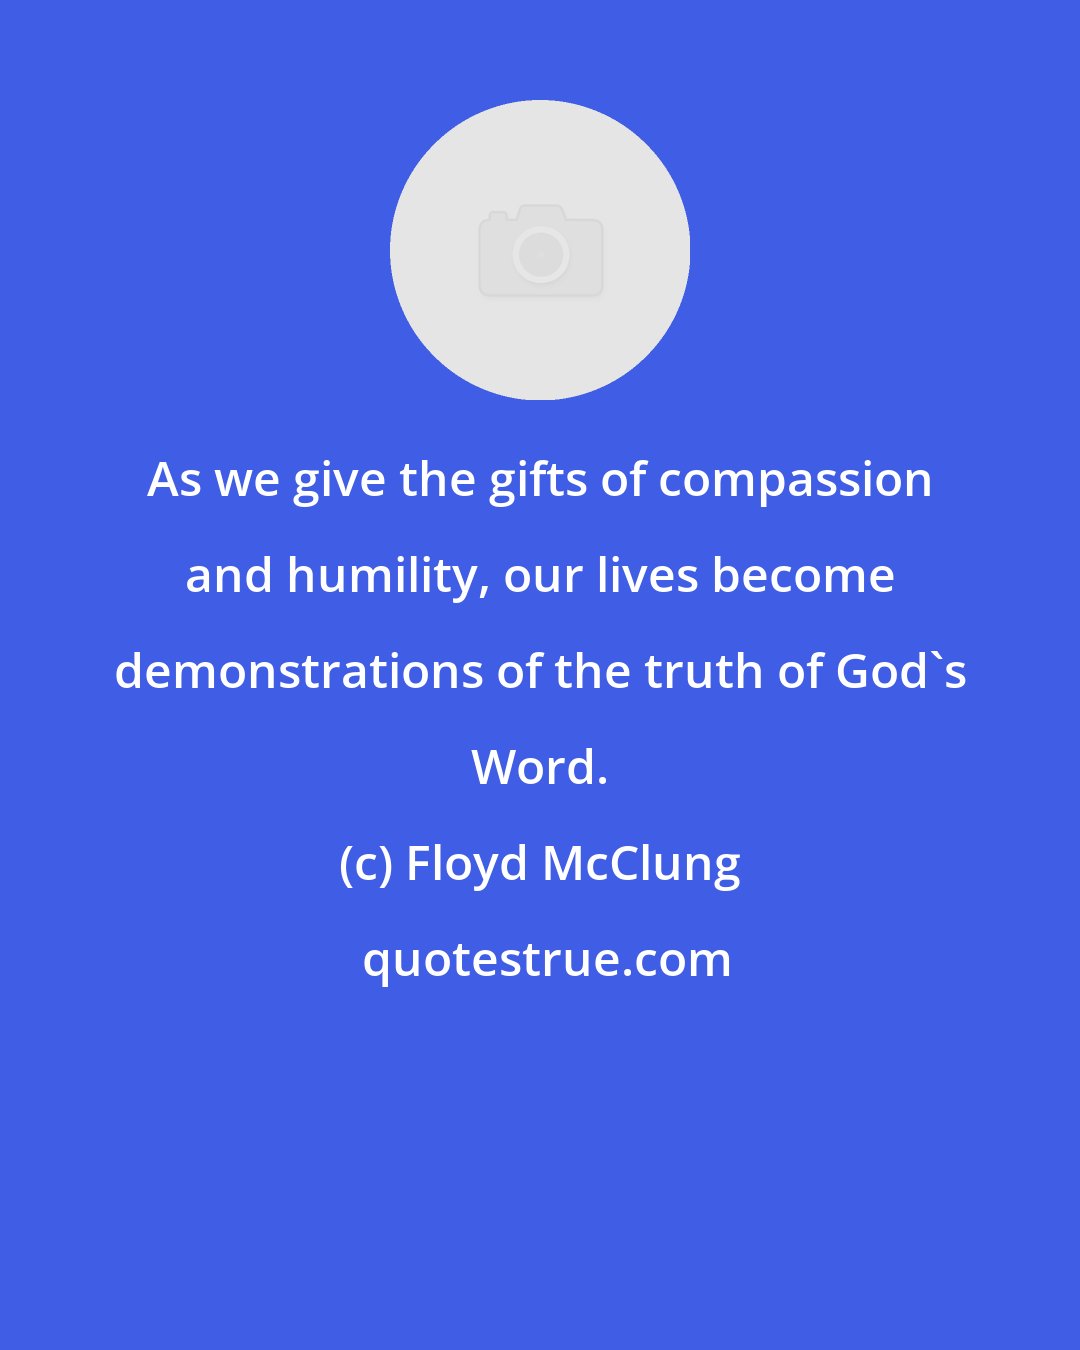 Floyd McClung: As we give the gifts of compassion and humility, our lives become demonstrations of the truth of God's Word.